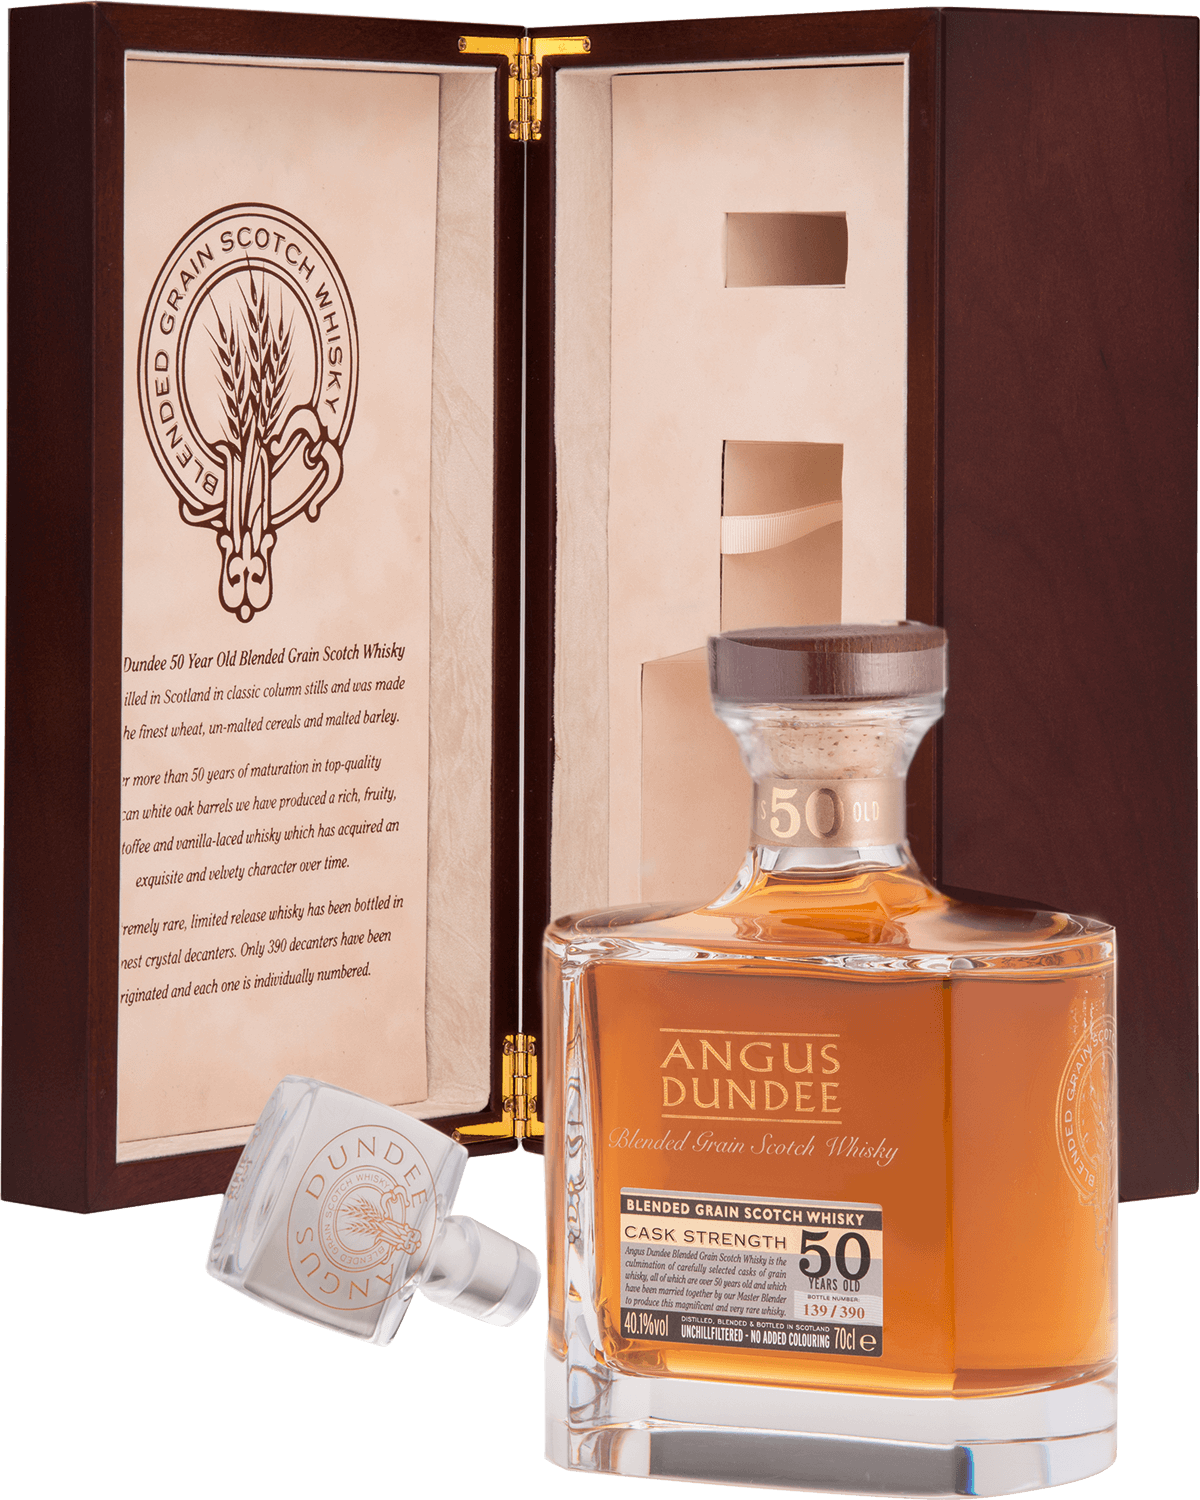 Angus Dundee Cask Strength Blended Grain Scotch Whisky 50 y.o. (gift box)